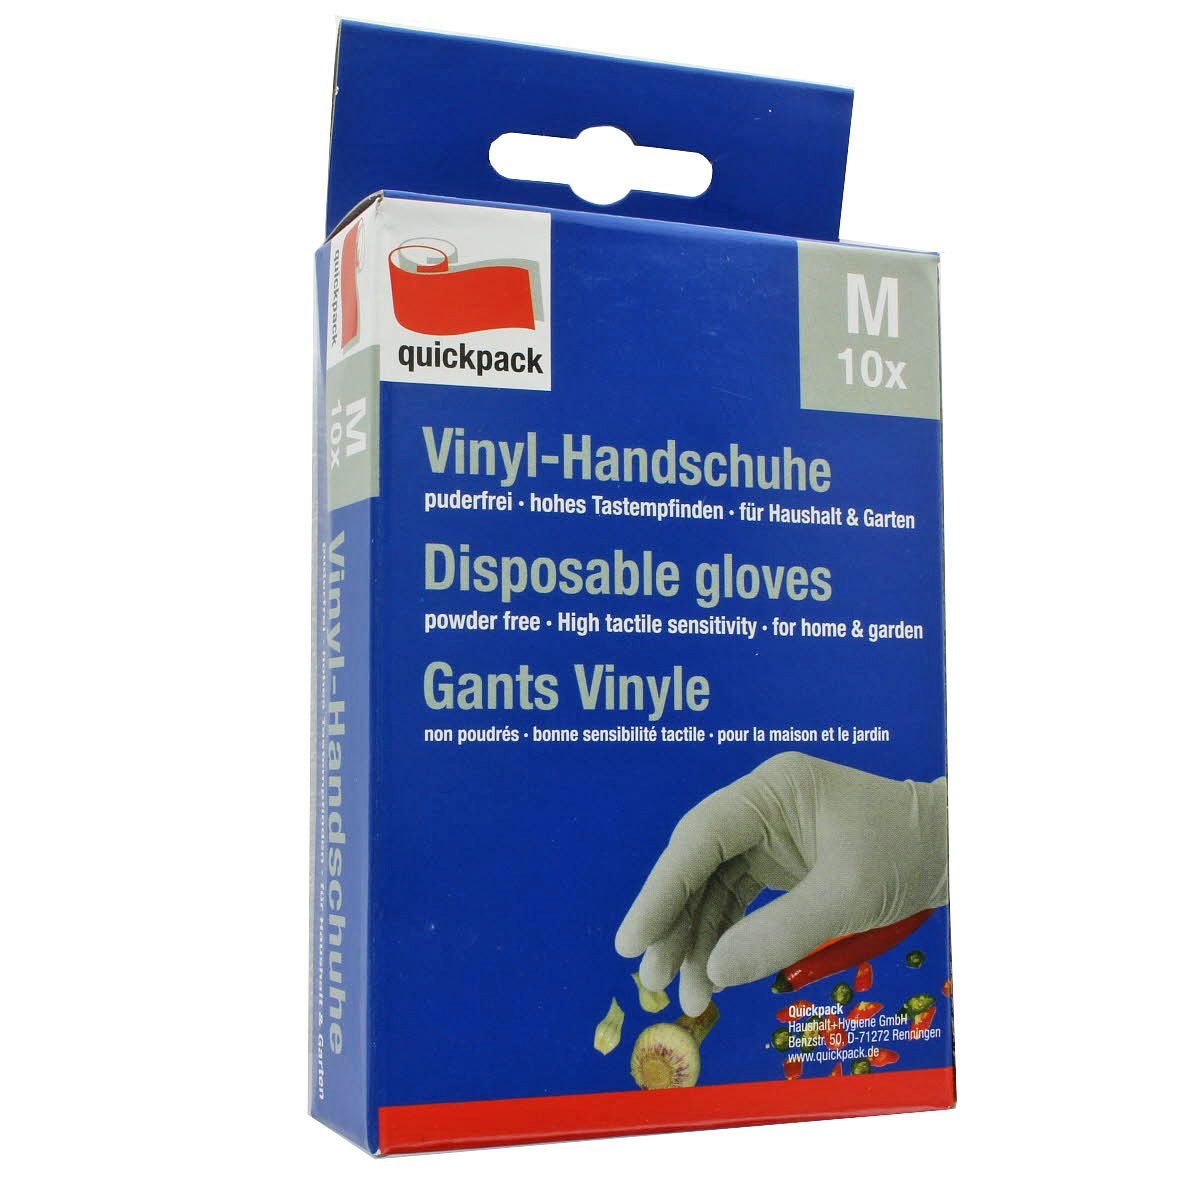 The white vinyl gloves in a pack of 10, size M.